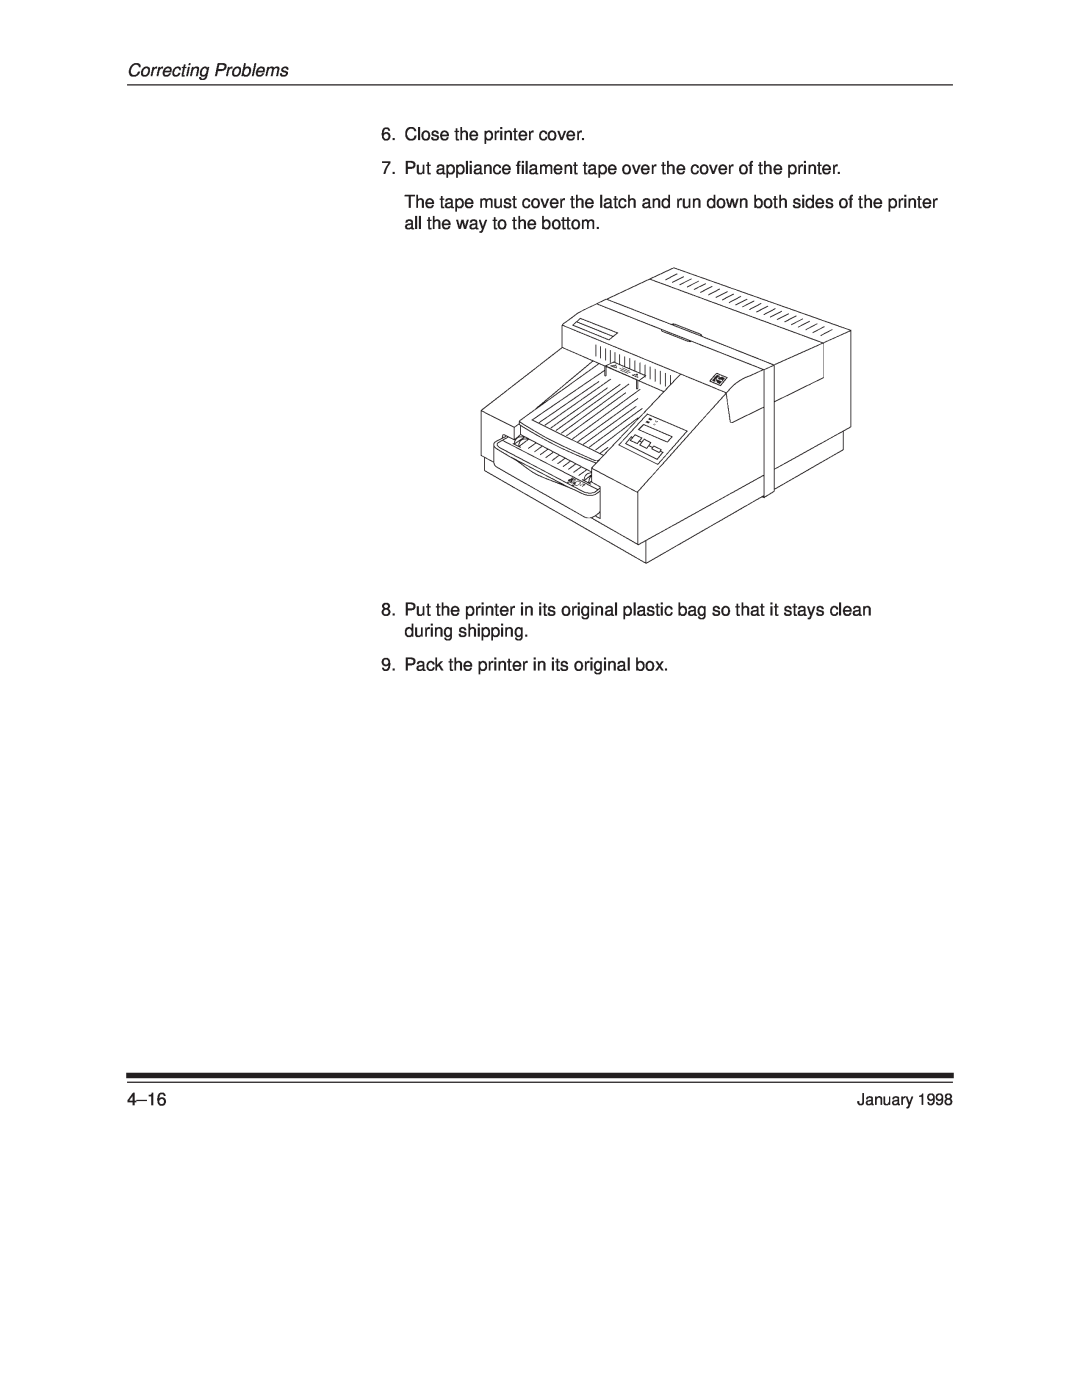 Kodak 8657 Correcting Problems, Close the printer cover, Put appliance filament tape over the cover of the printer, 4±16 